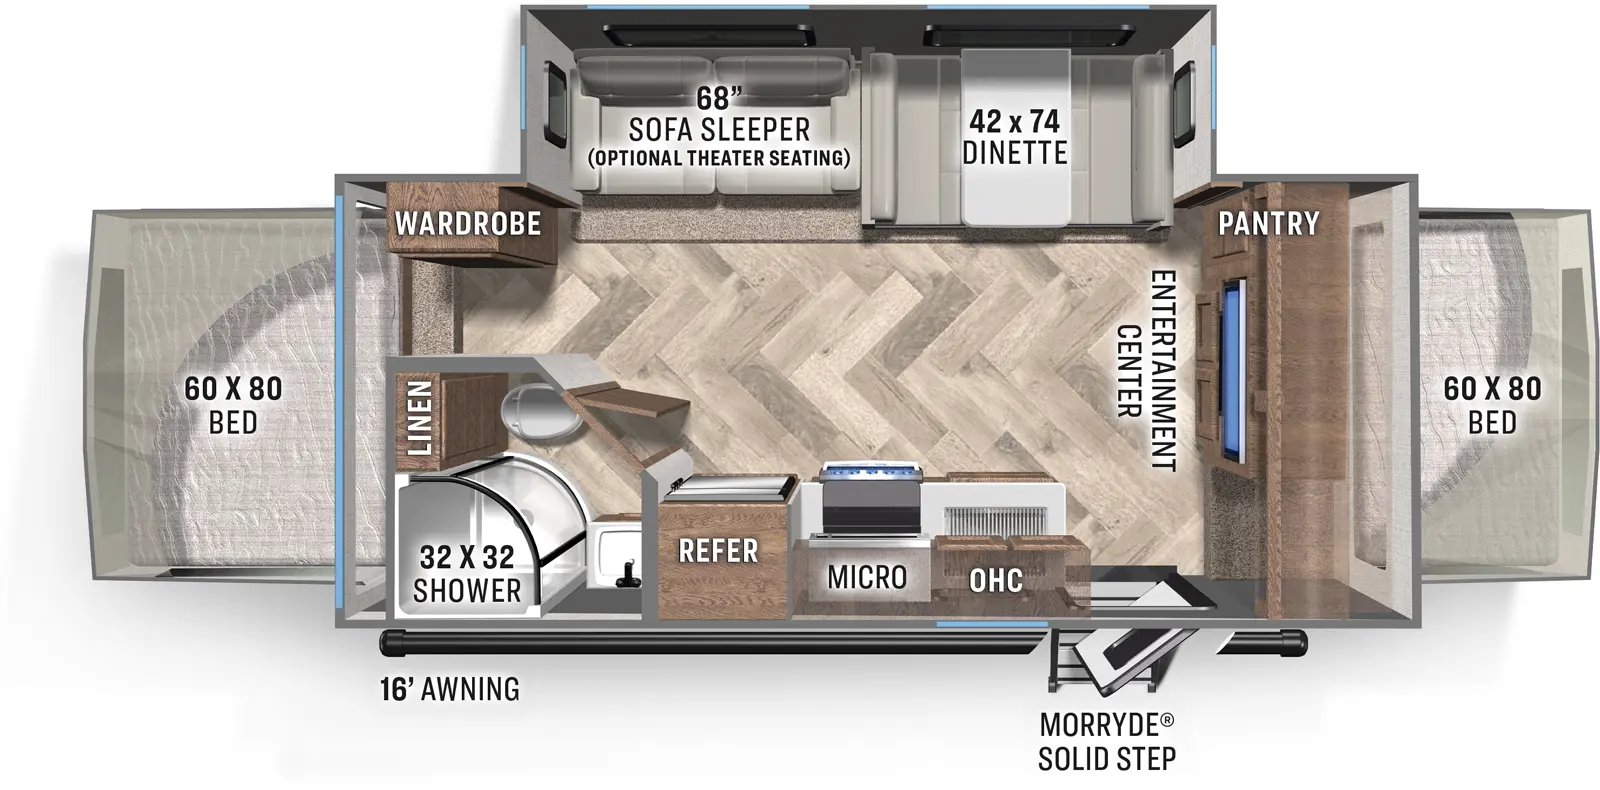 The 241H has one slideout and one entry. Exterior features a 16 foot awning, and MORryde solid step entry. Interior layout front to back: front tent bed with pantry and entertainment center in front of it; off-door side slideout with dinette and sleeper sofa (optional theater seating); door side entry, kitchen counter with sink, overhead cabinet, microwave, cooktop, and refrigerator; front door side full bathroom with linen closet; rear tent bed and wardrobe.